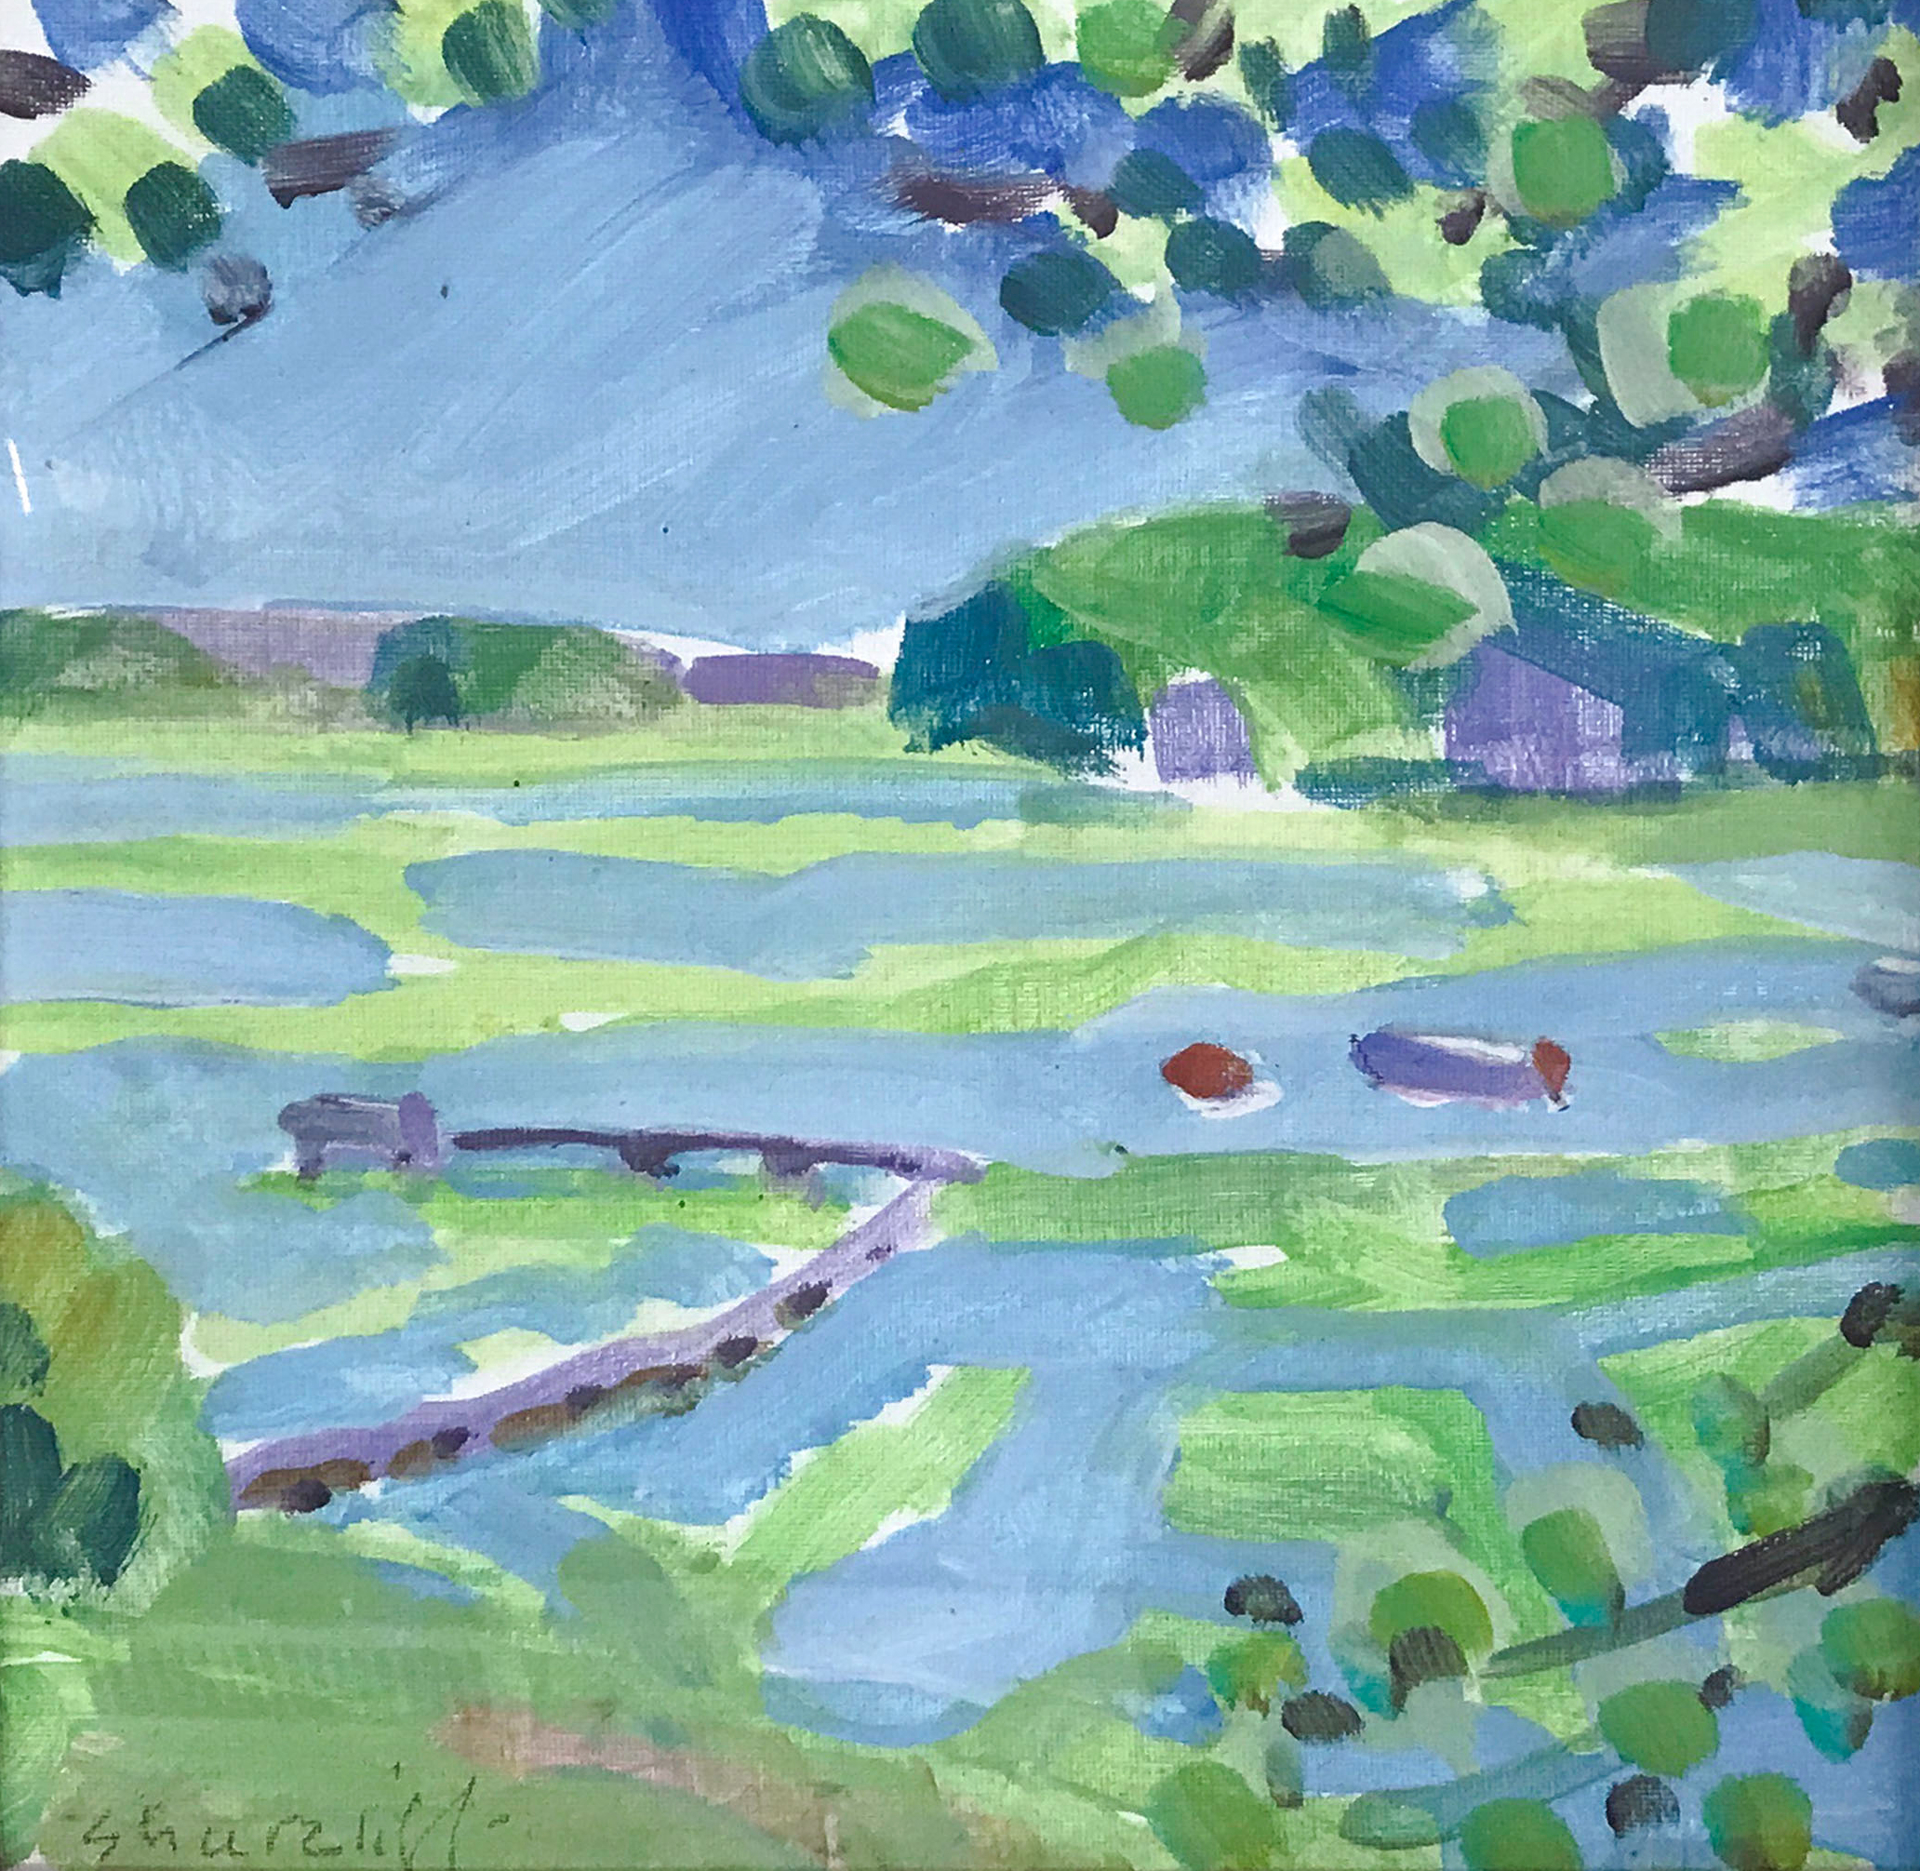 Marsh Study #10 by Charles Shurcliff